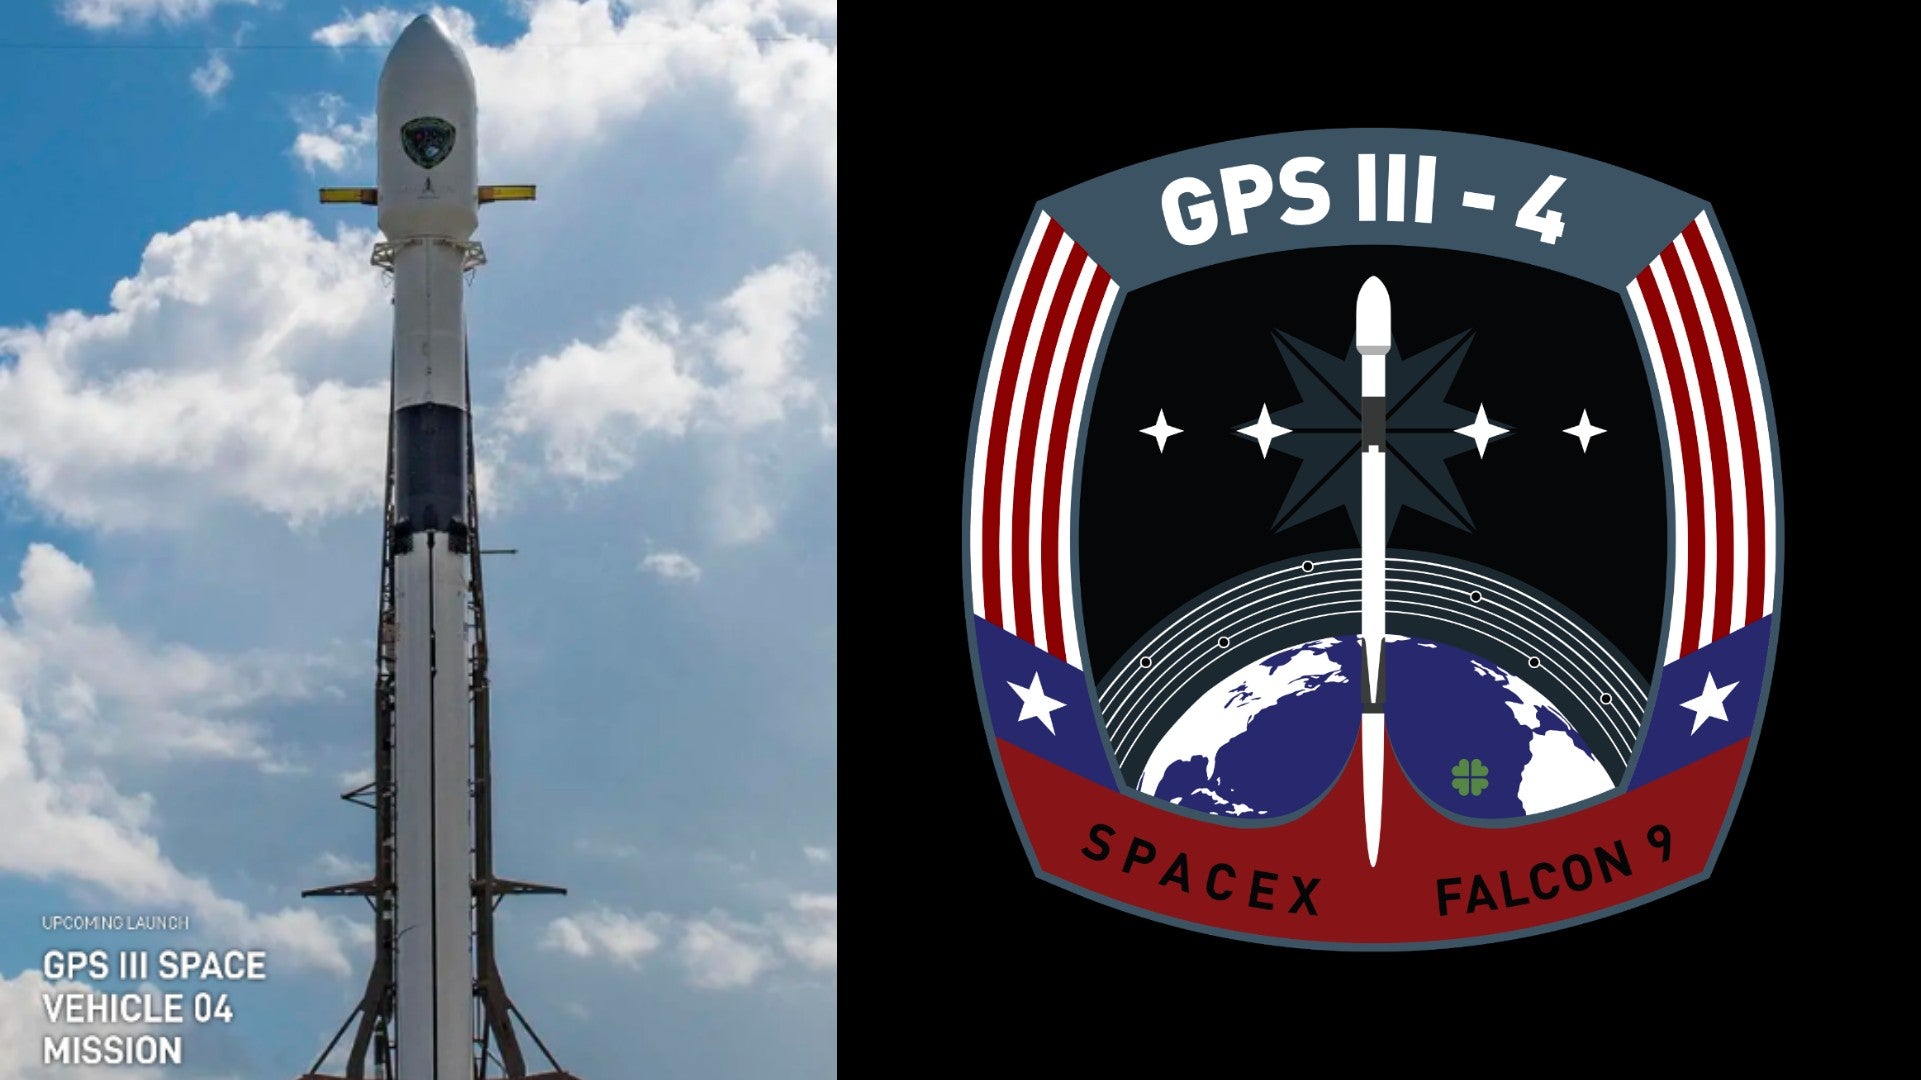 SpaceX completes Falcon 9 test ahead of U.S. Space Force GPS-III mission